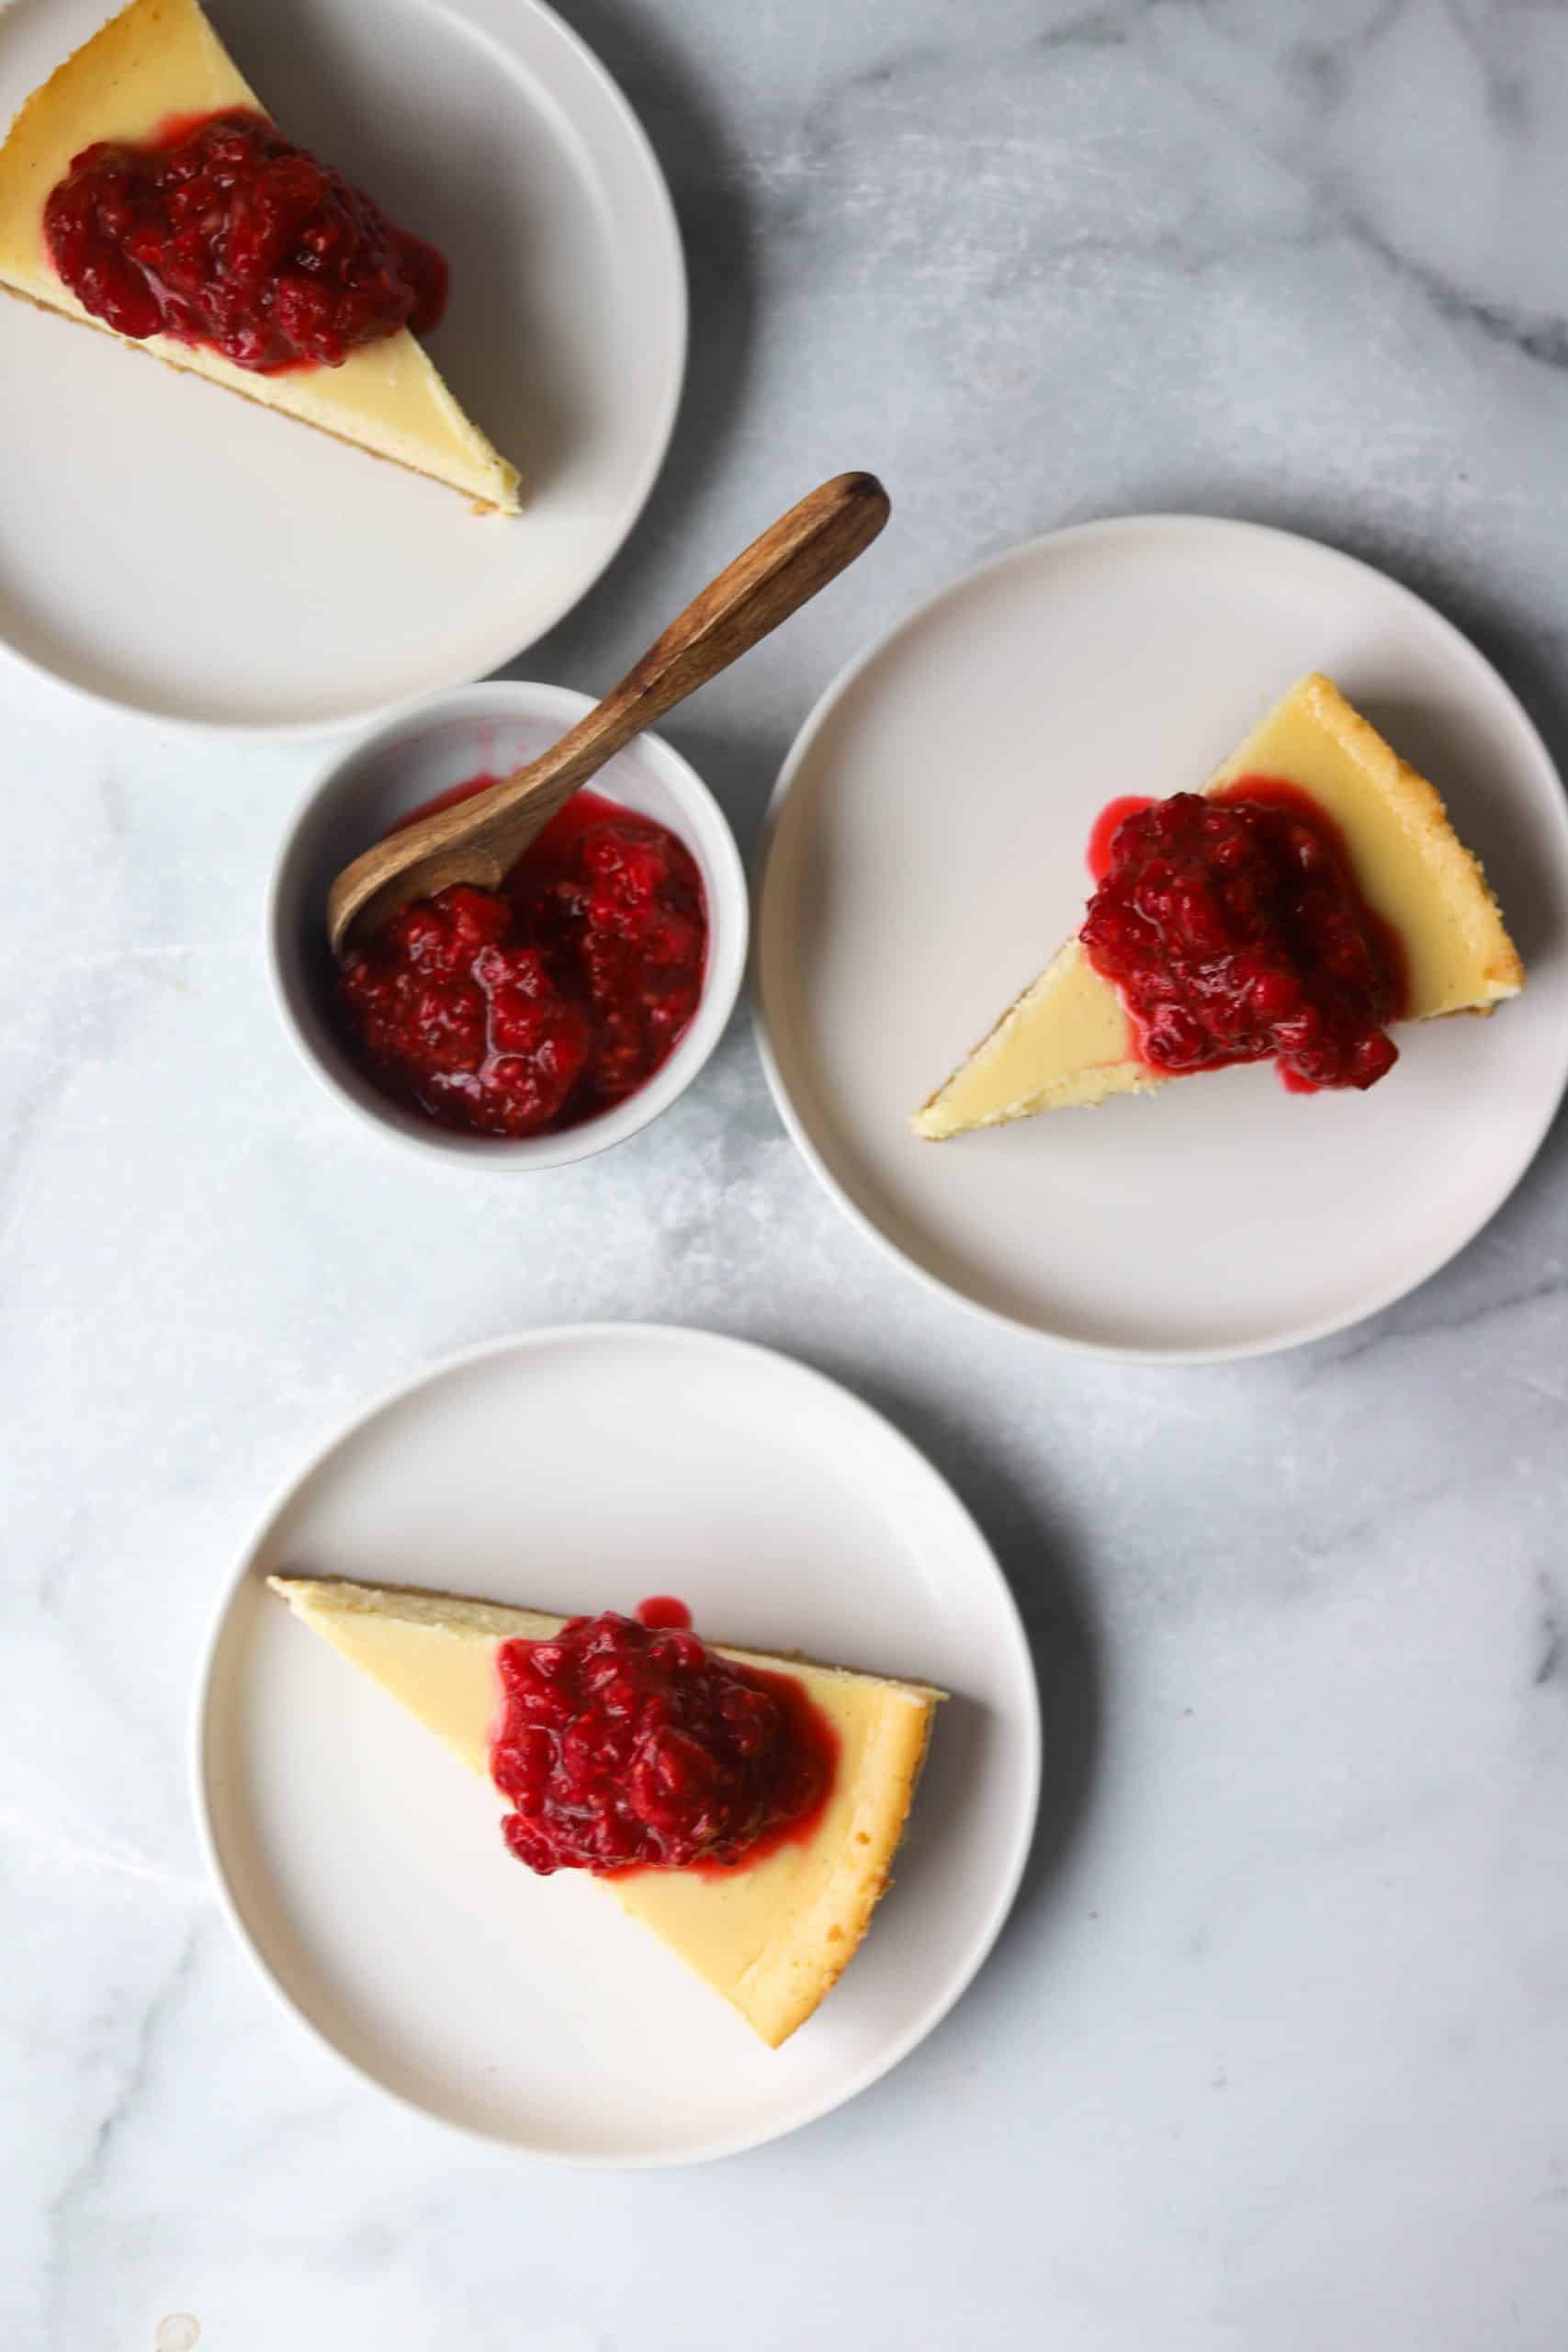 Three plates with slices of cheesecake and a small bowl of raspberry topping.